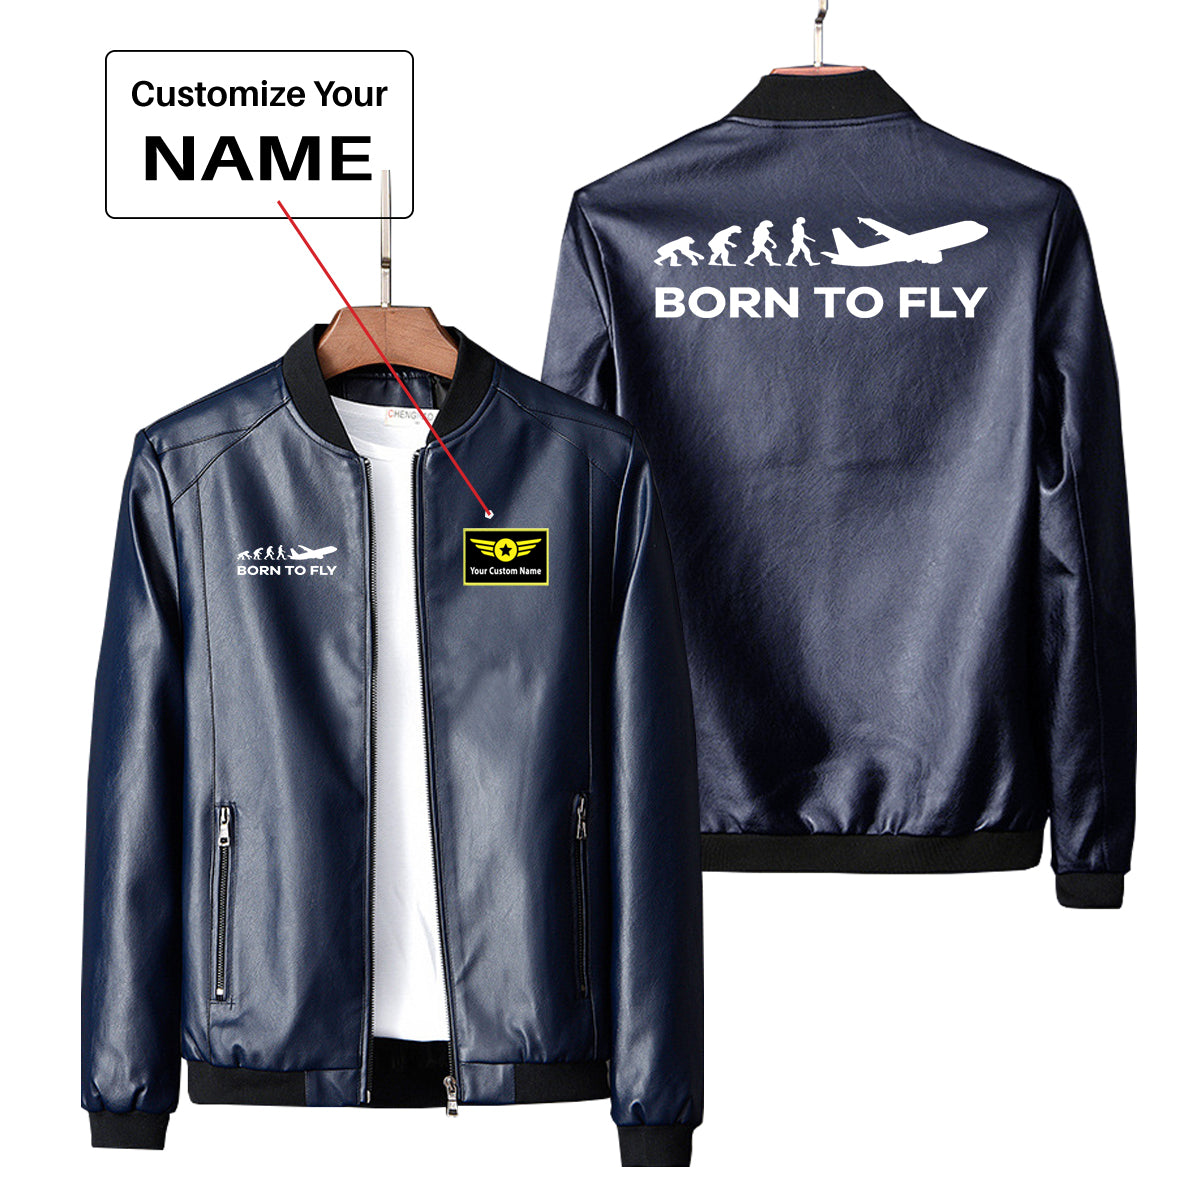 Born To Fly Designed PU Leather Jackets